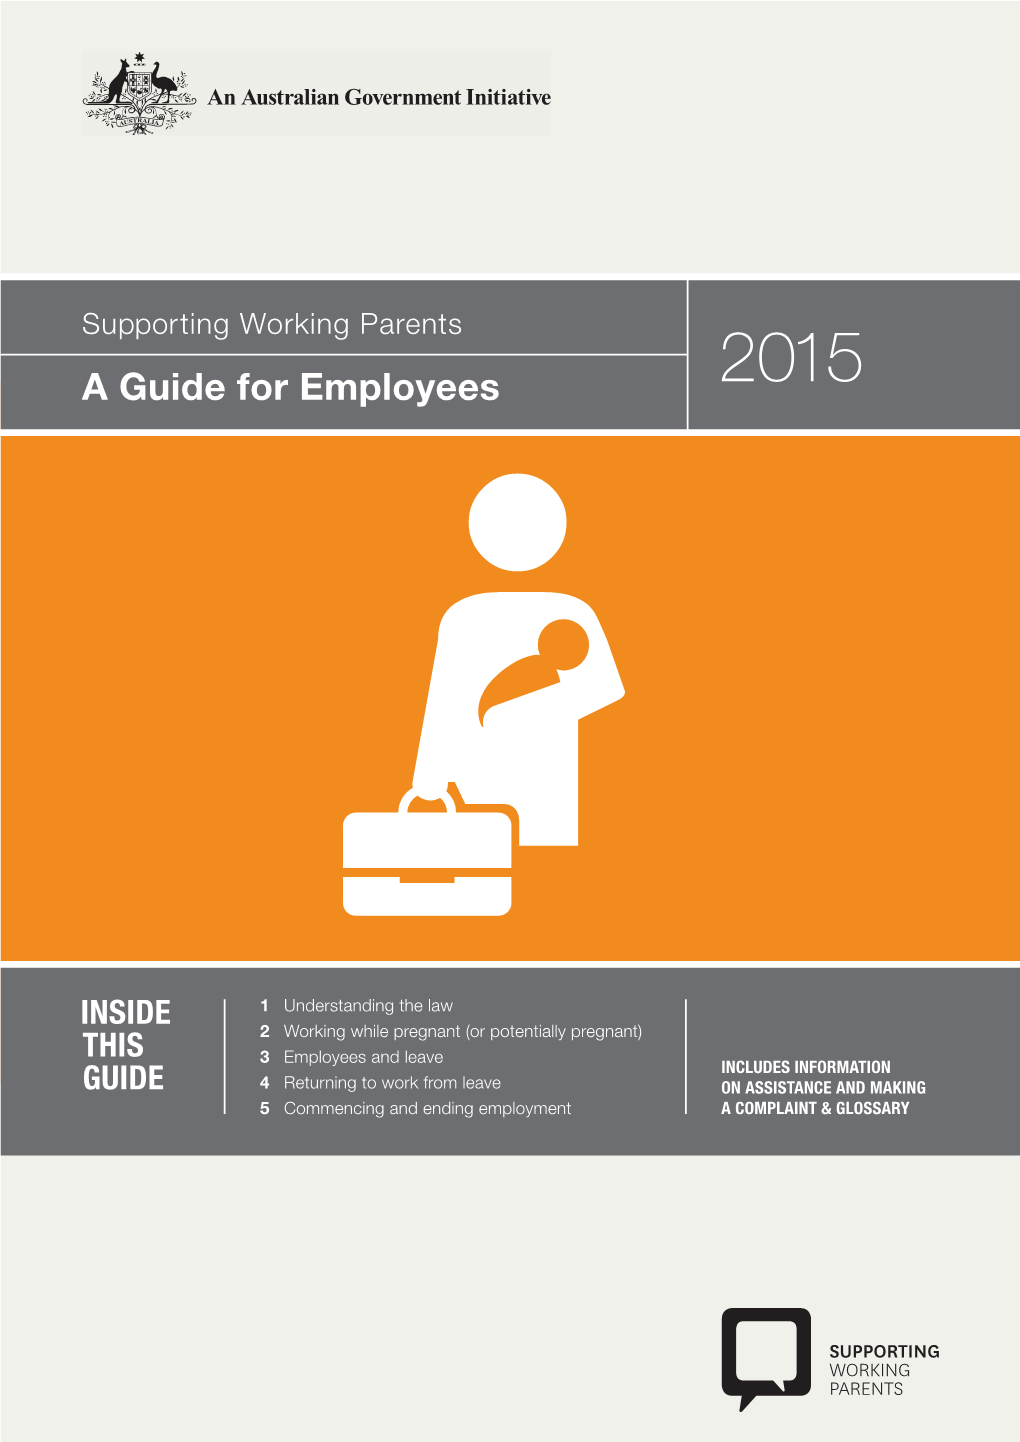 Pregnancy, Parental Leave and Return to Work: Know Your Rights